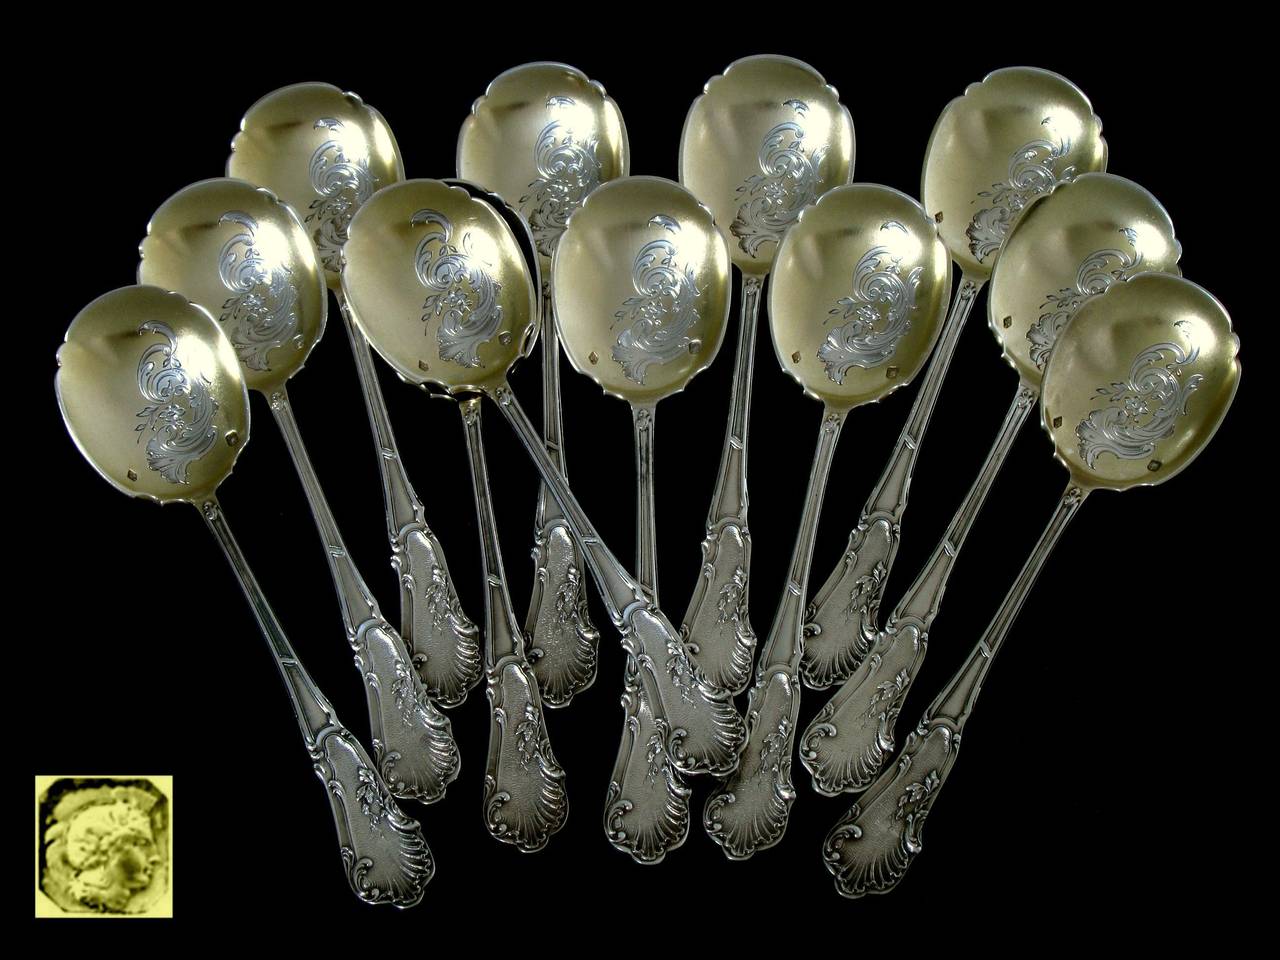 Soufflot French All Sterling Silver Vermeil Ice Cream Spoons Set 12 pc Rococo

Head of Minerve 1 st titre for 950/1000 French Sterling Silver Vermeil guarantee.

A set of truly exceptional quality, for the richness of their decoration, not only